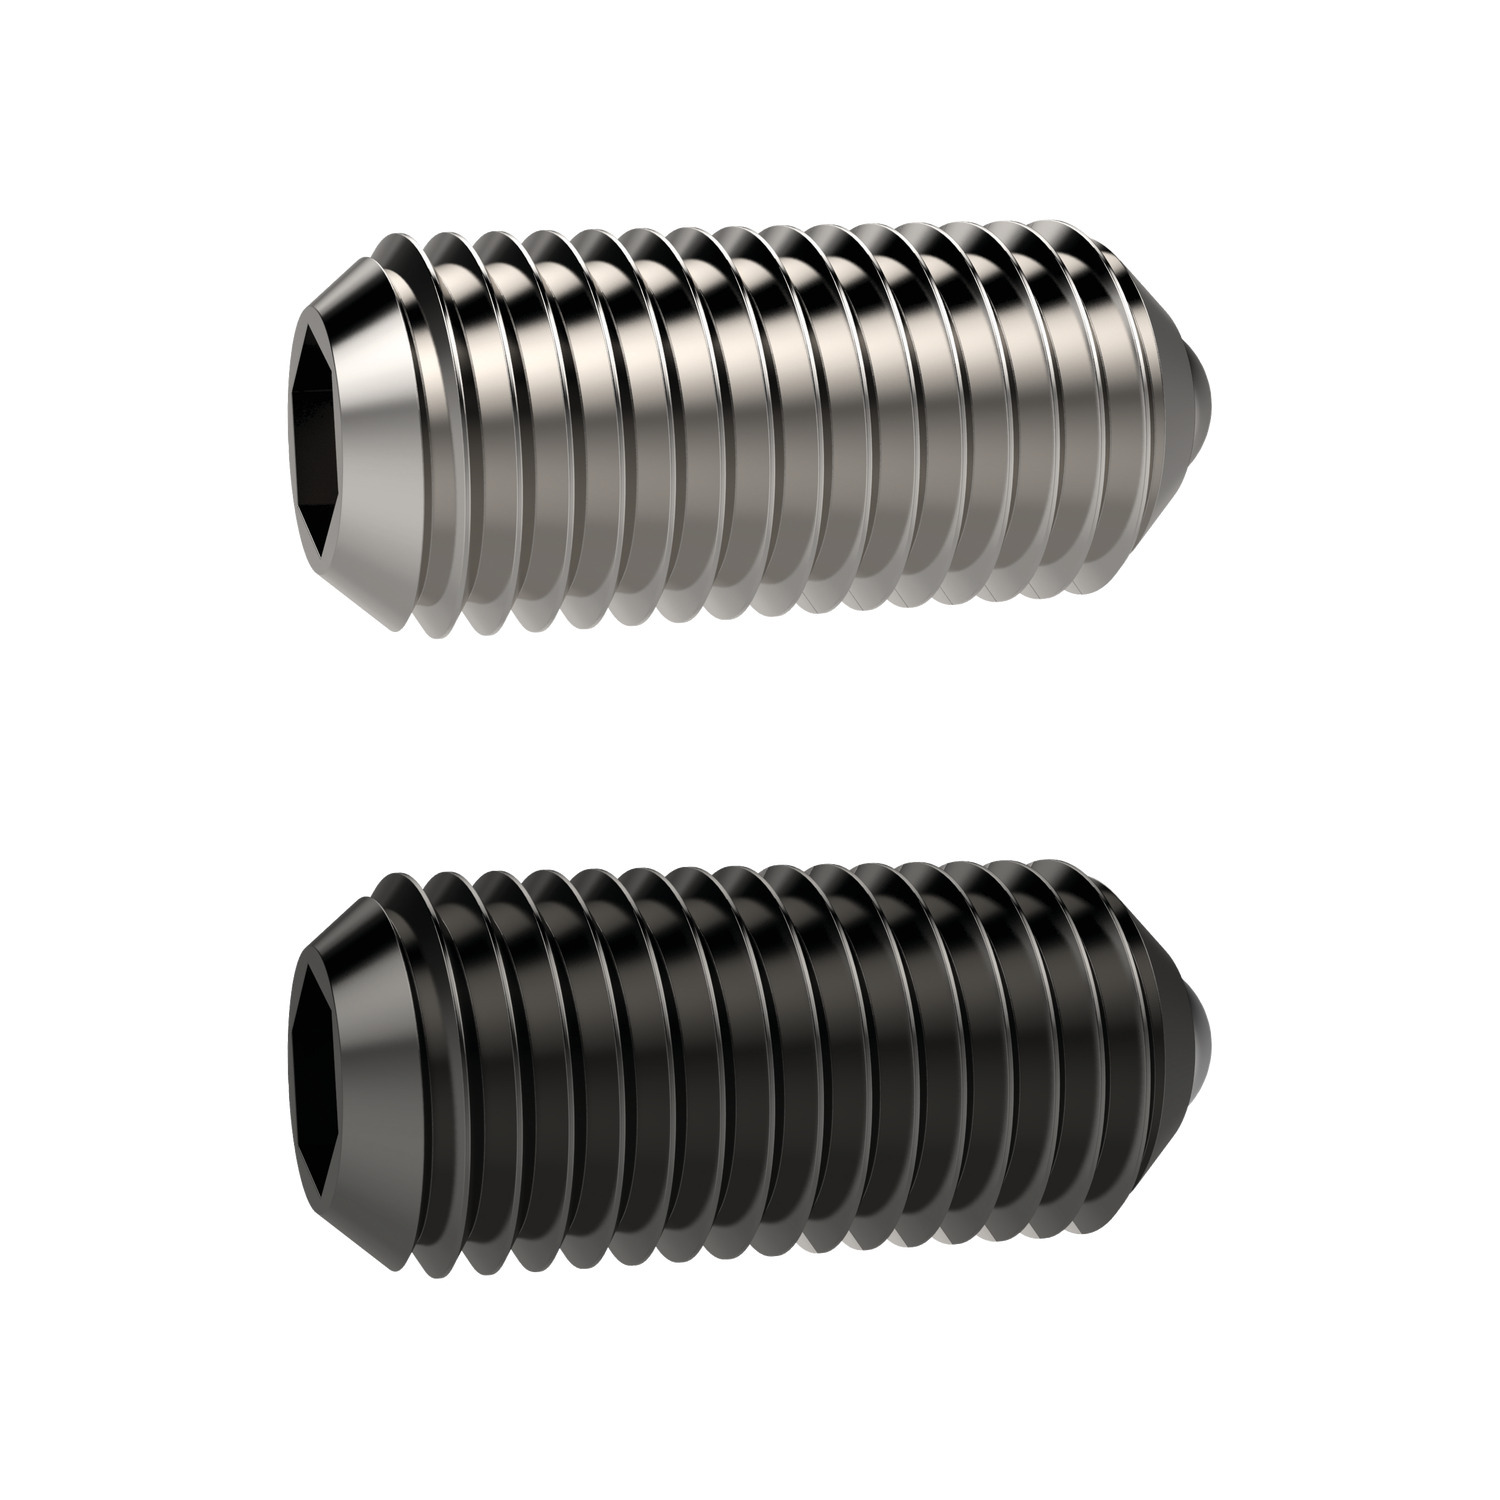 31610.W0212 Spring Plungers- Moveable Ball- S/S M12 x 26 - Stainless Steel- Standard Spring Load